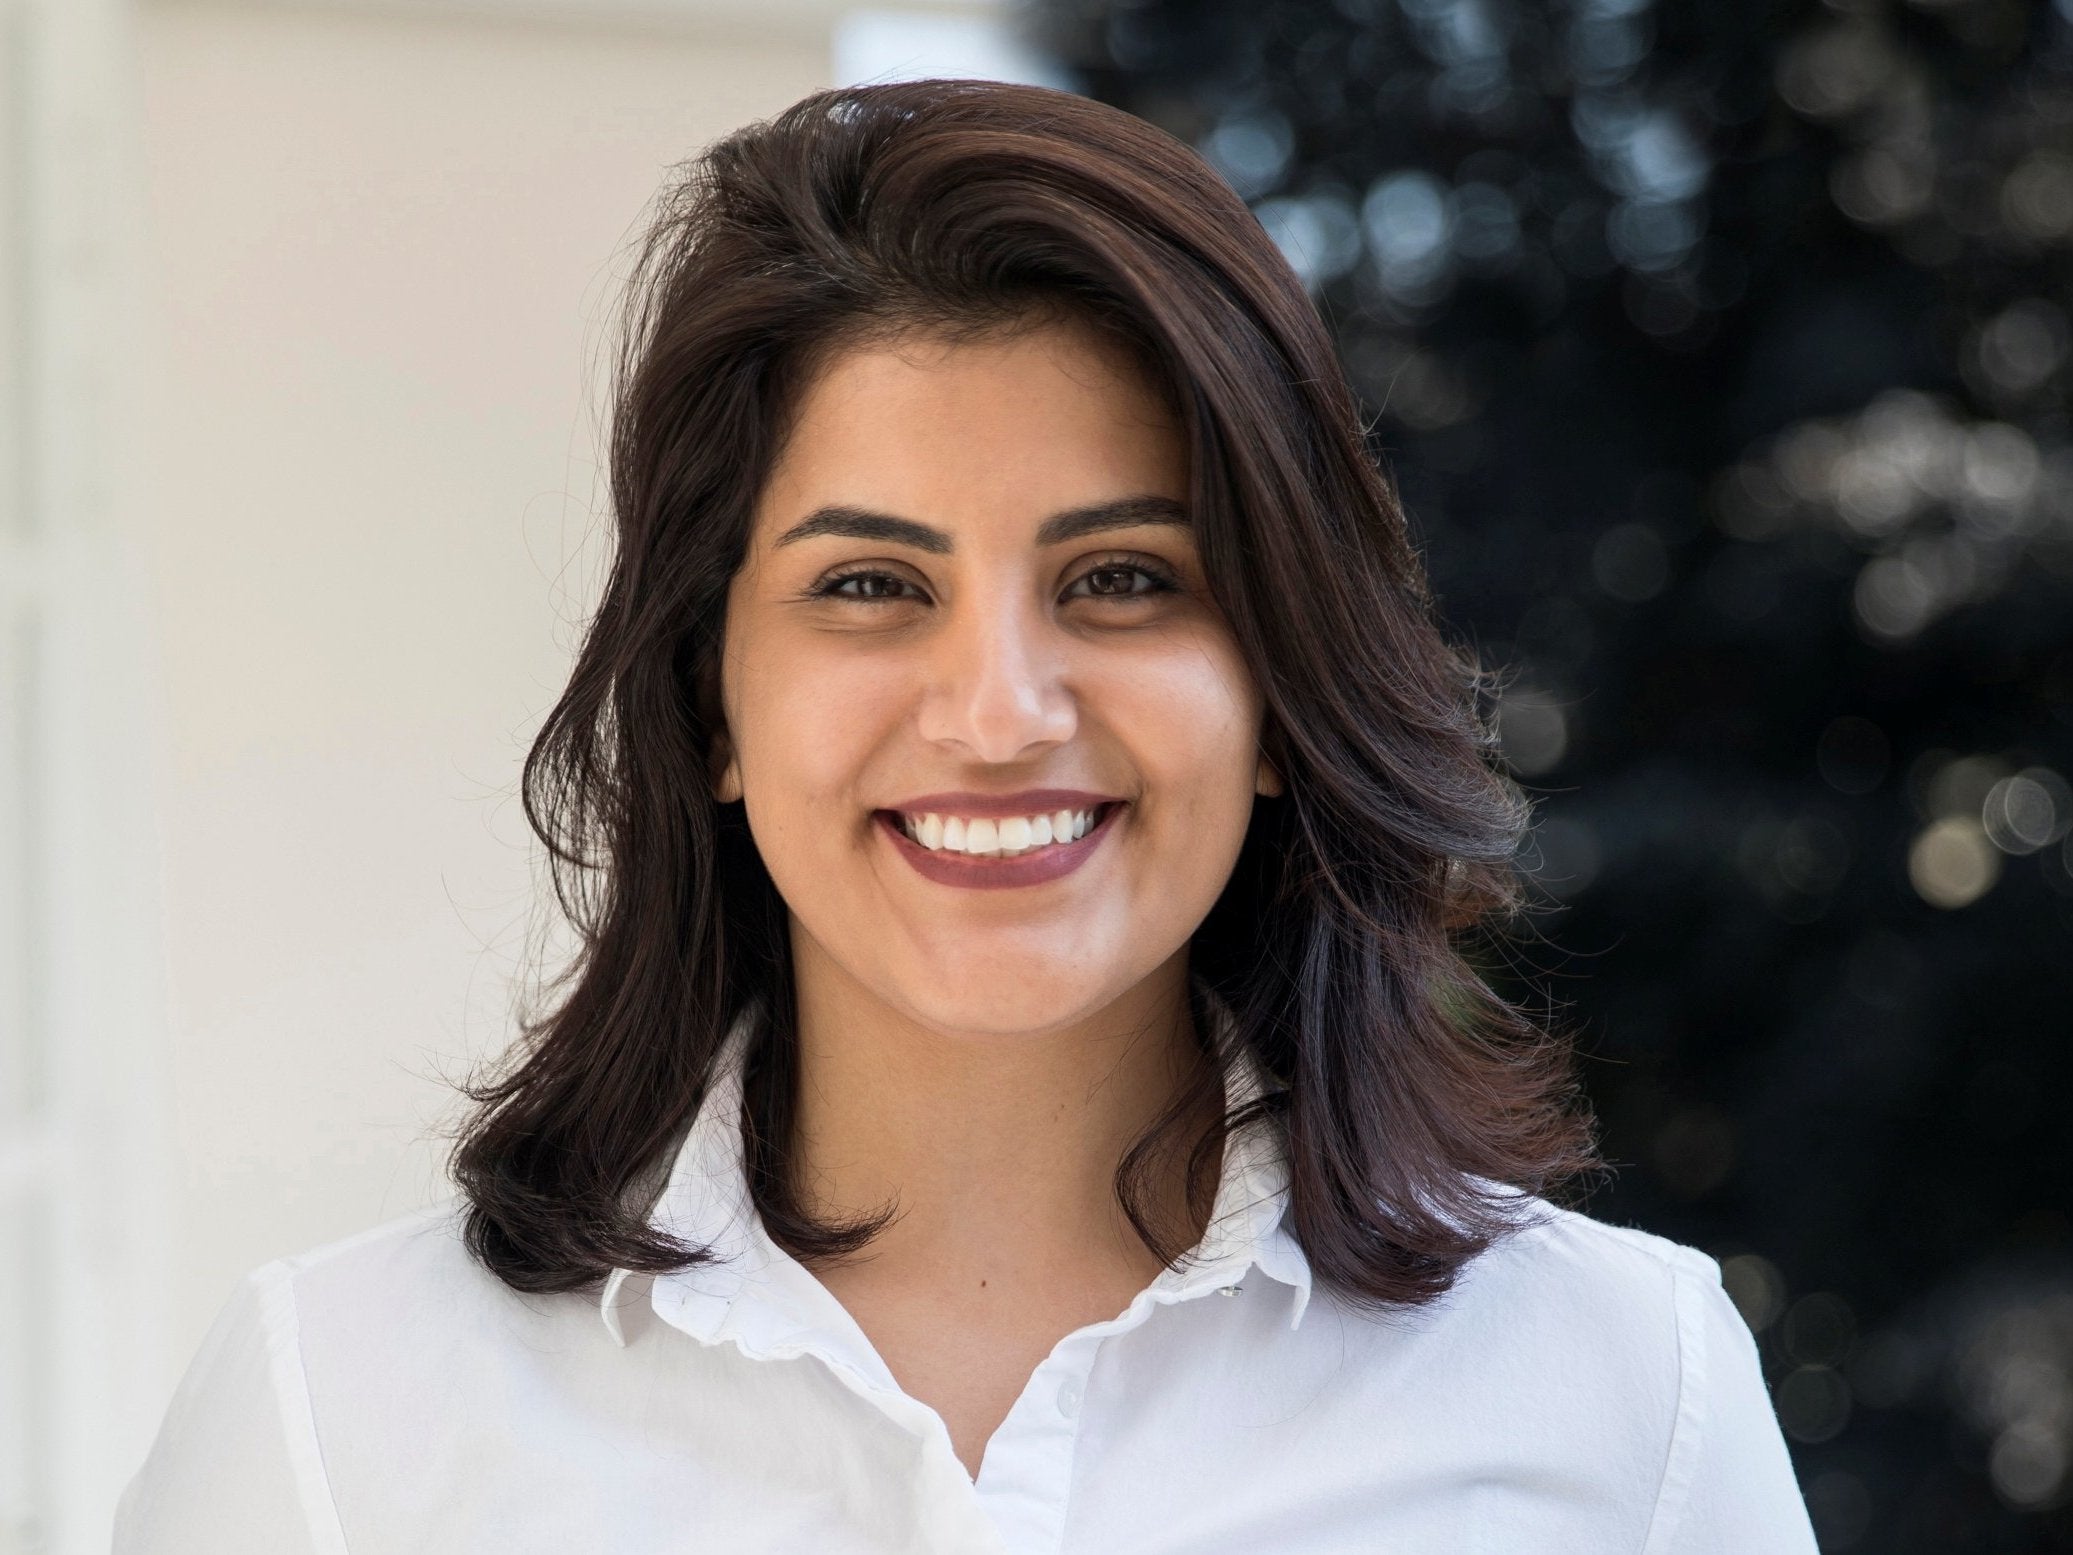 Loujain al-Hathloul, who has been nominated for the Nobel peace prize, successfully campaigned for women to have the right to drive in Saudi Arabia